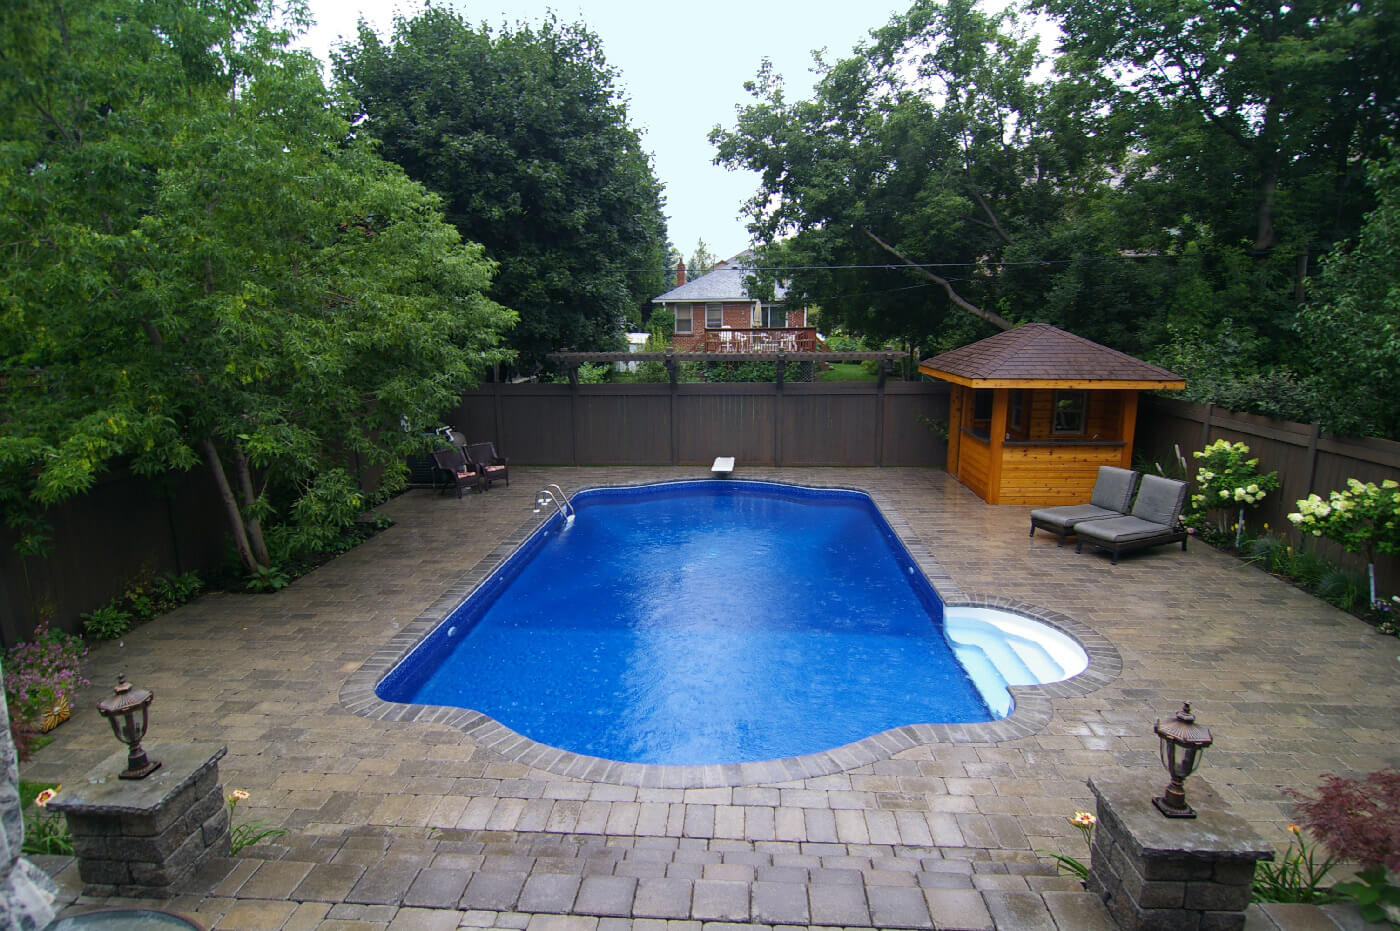 Beautiful inground pool installed with interlock landscaping built by Seaway Pools & Hot Tubs contractors.